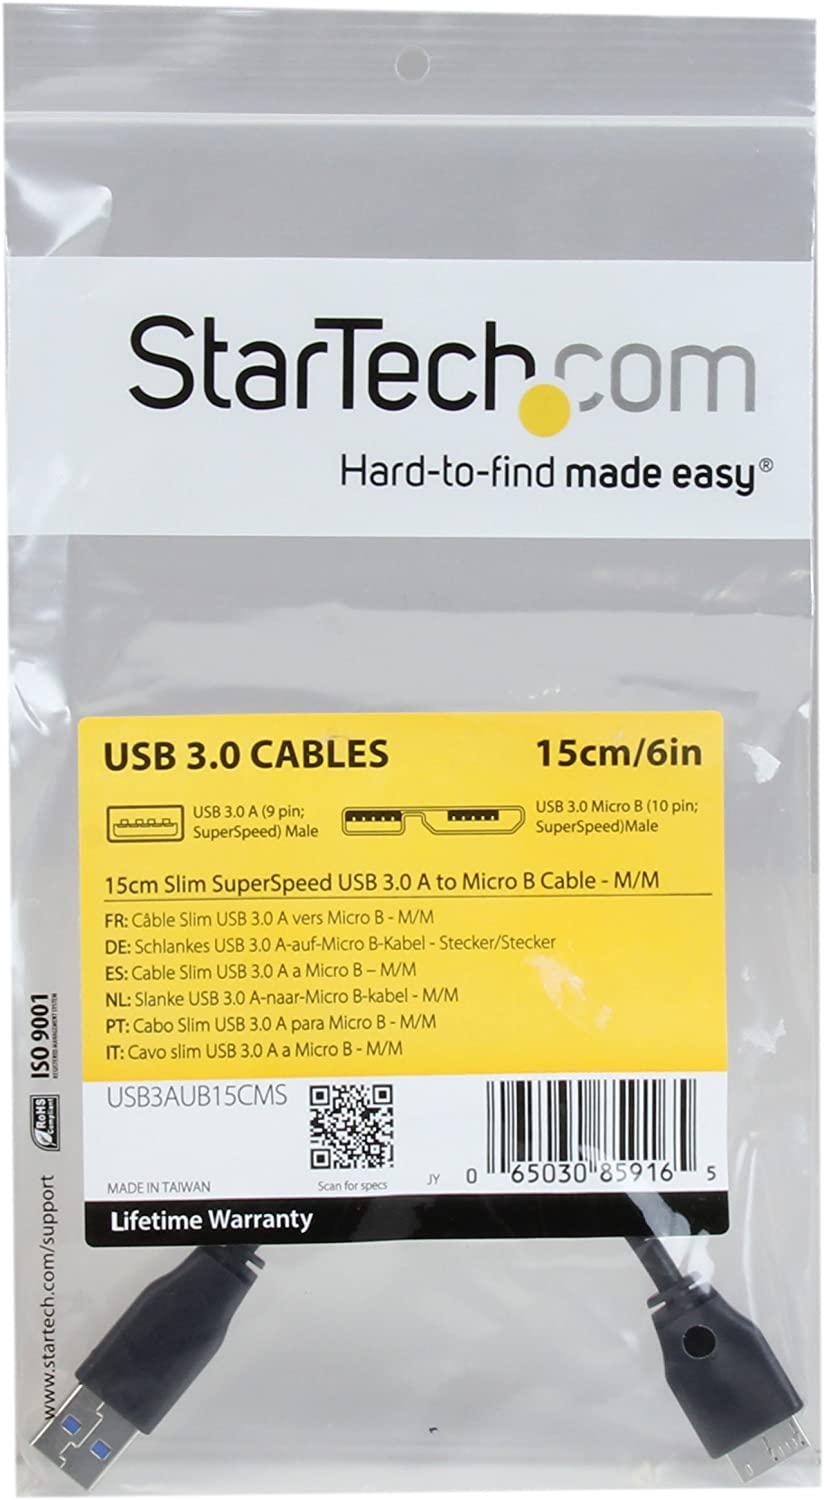 StarTech.com 15cm 6in Short Slim USB 3.0 A to Micro B Cable M/M - Mobile Charge Sync USB 3.0 Micro B Cable for Smartphones and Tablets (USB3AUB15CMS)